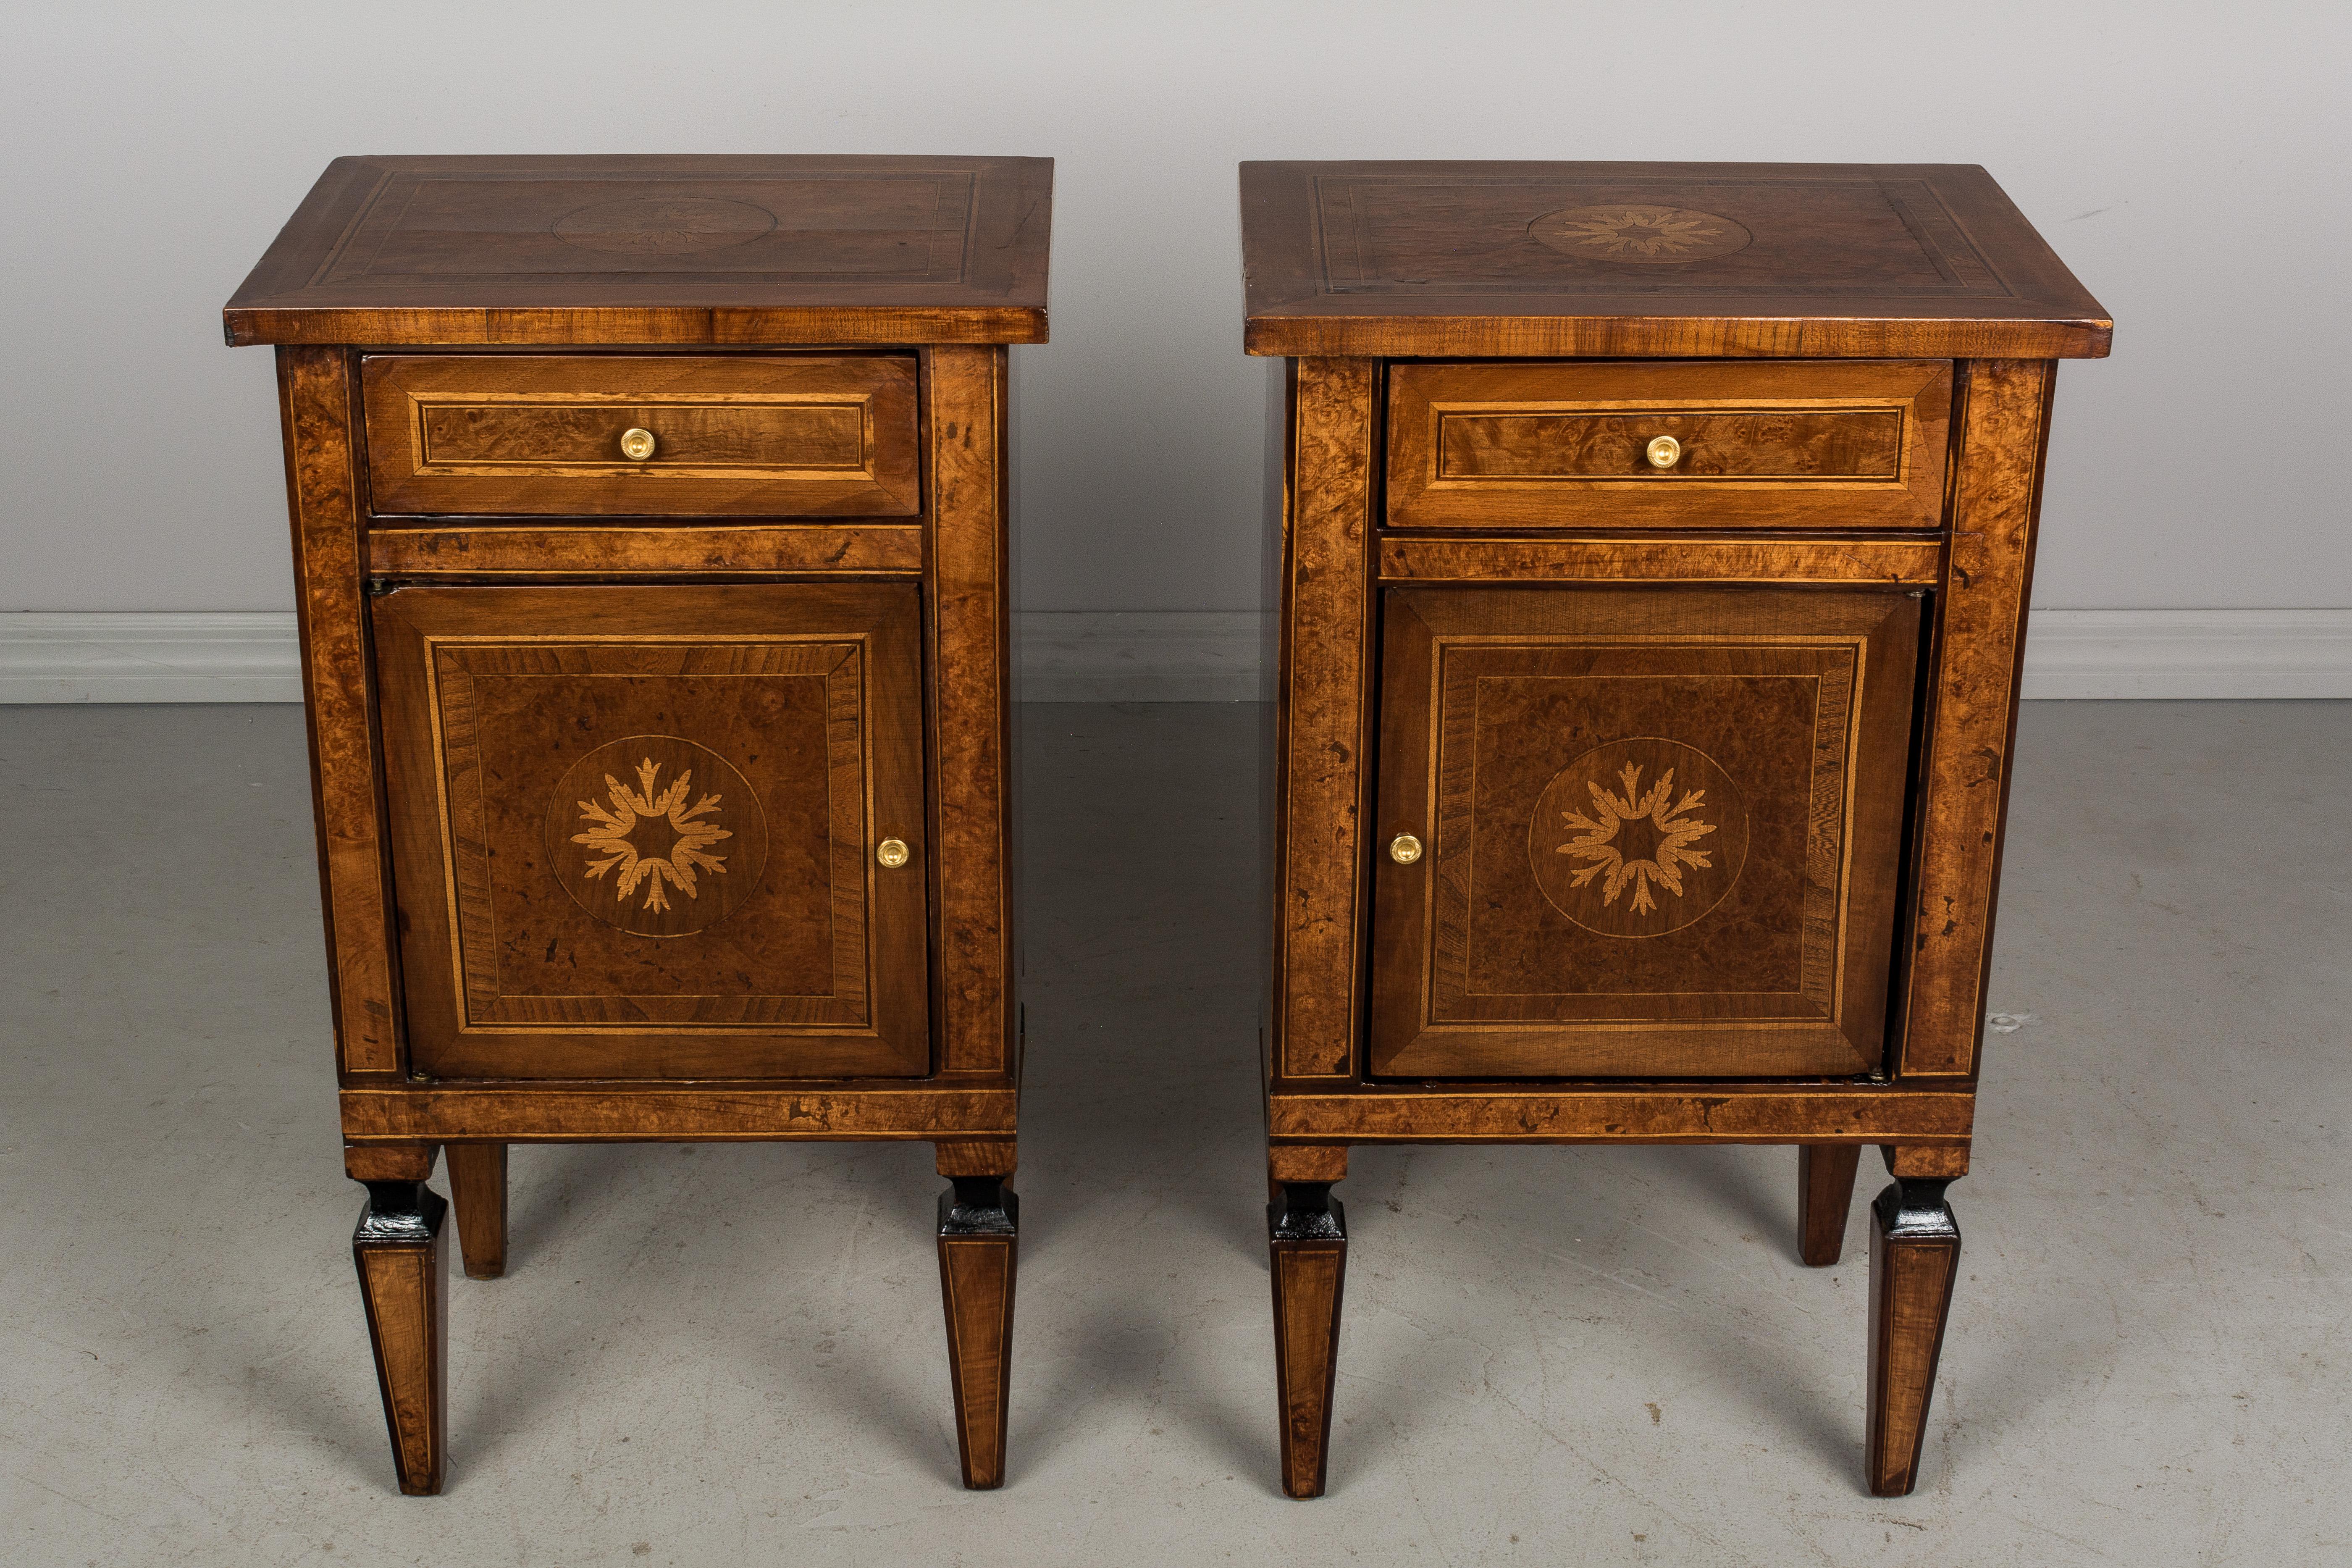 Neoclassical Revival Pair of Italian Marquetry Side Tables